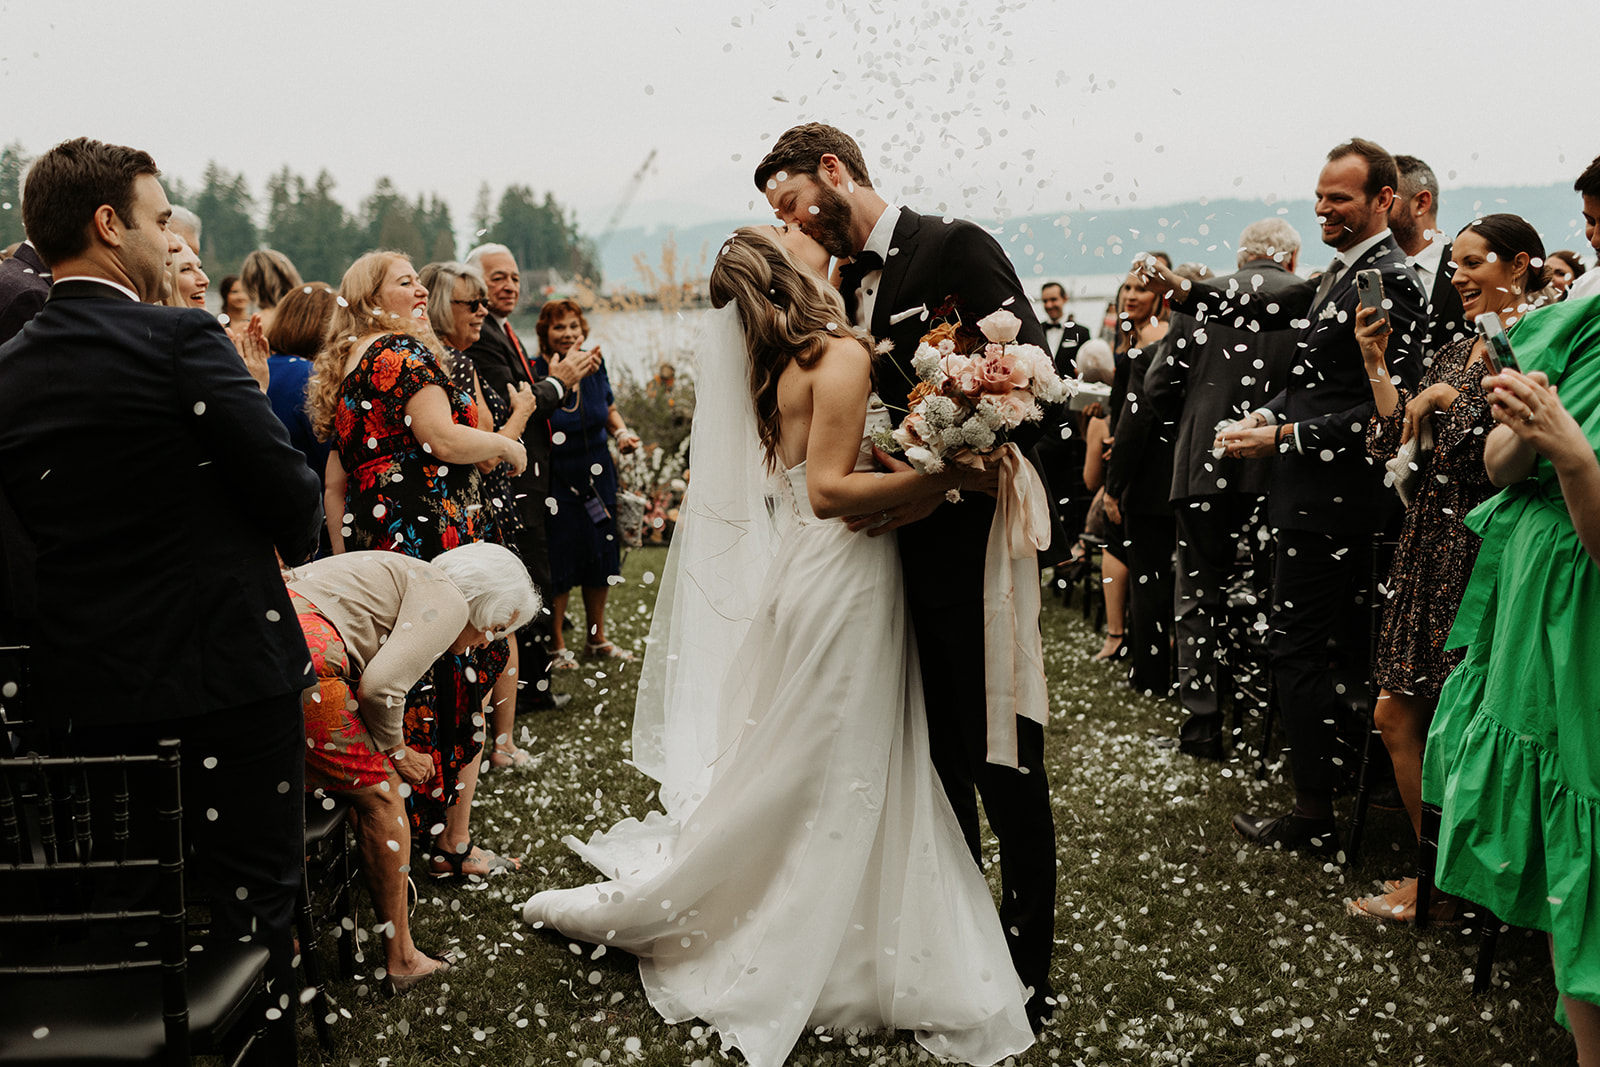 bride and groom kiss in aisle after ceremony at alderbrook resort wedding